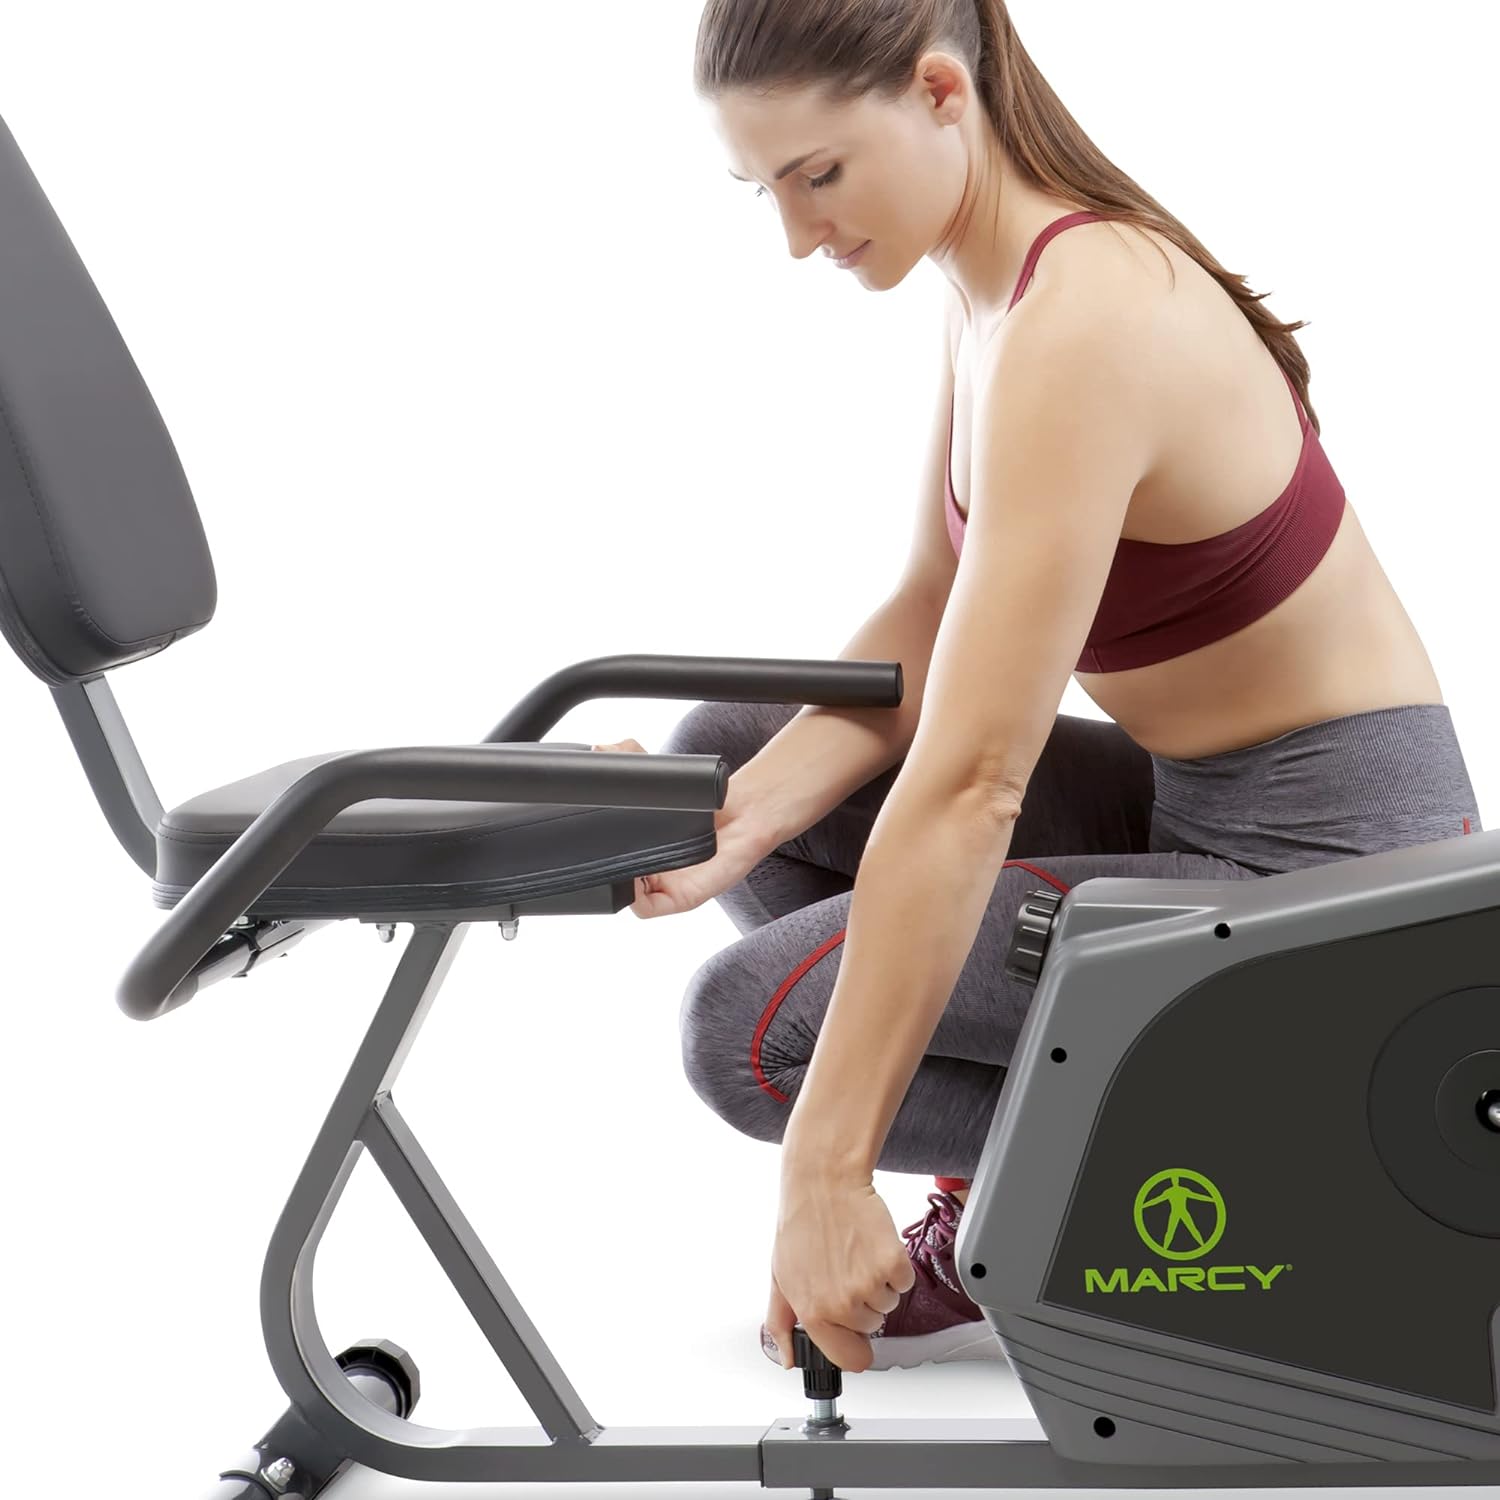 Marcy Magnetic Recumbent Exercise Bike For Home and Home Gym, With Digital Monitor And Quick Adjustable Seat NS-1206R